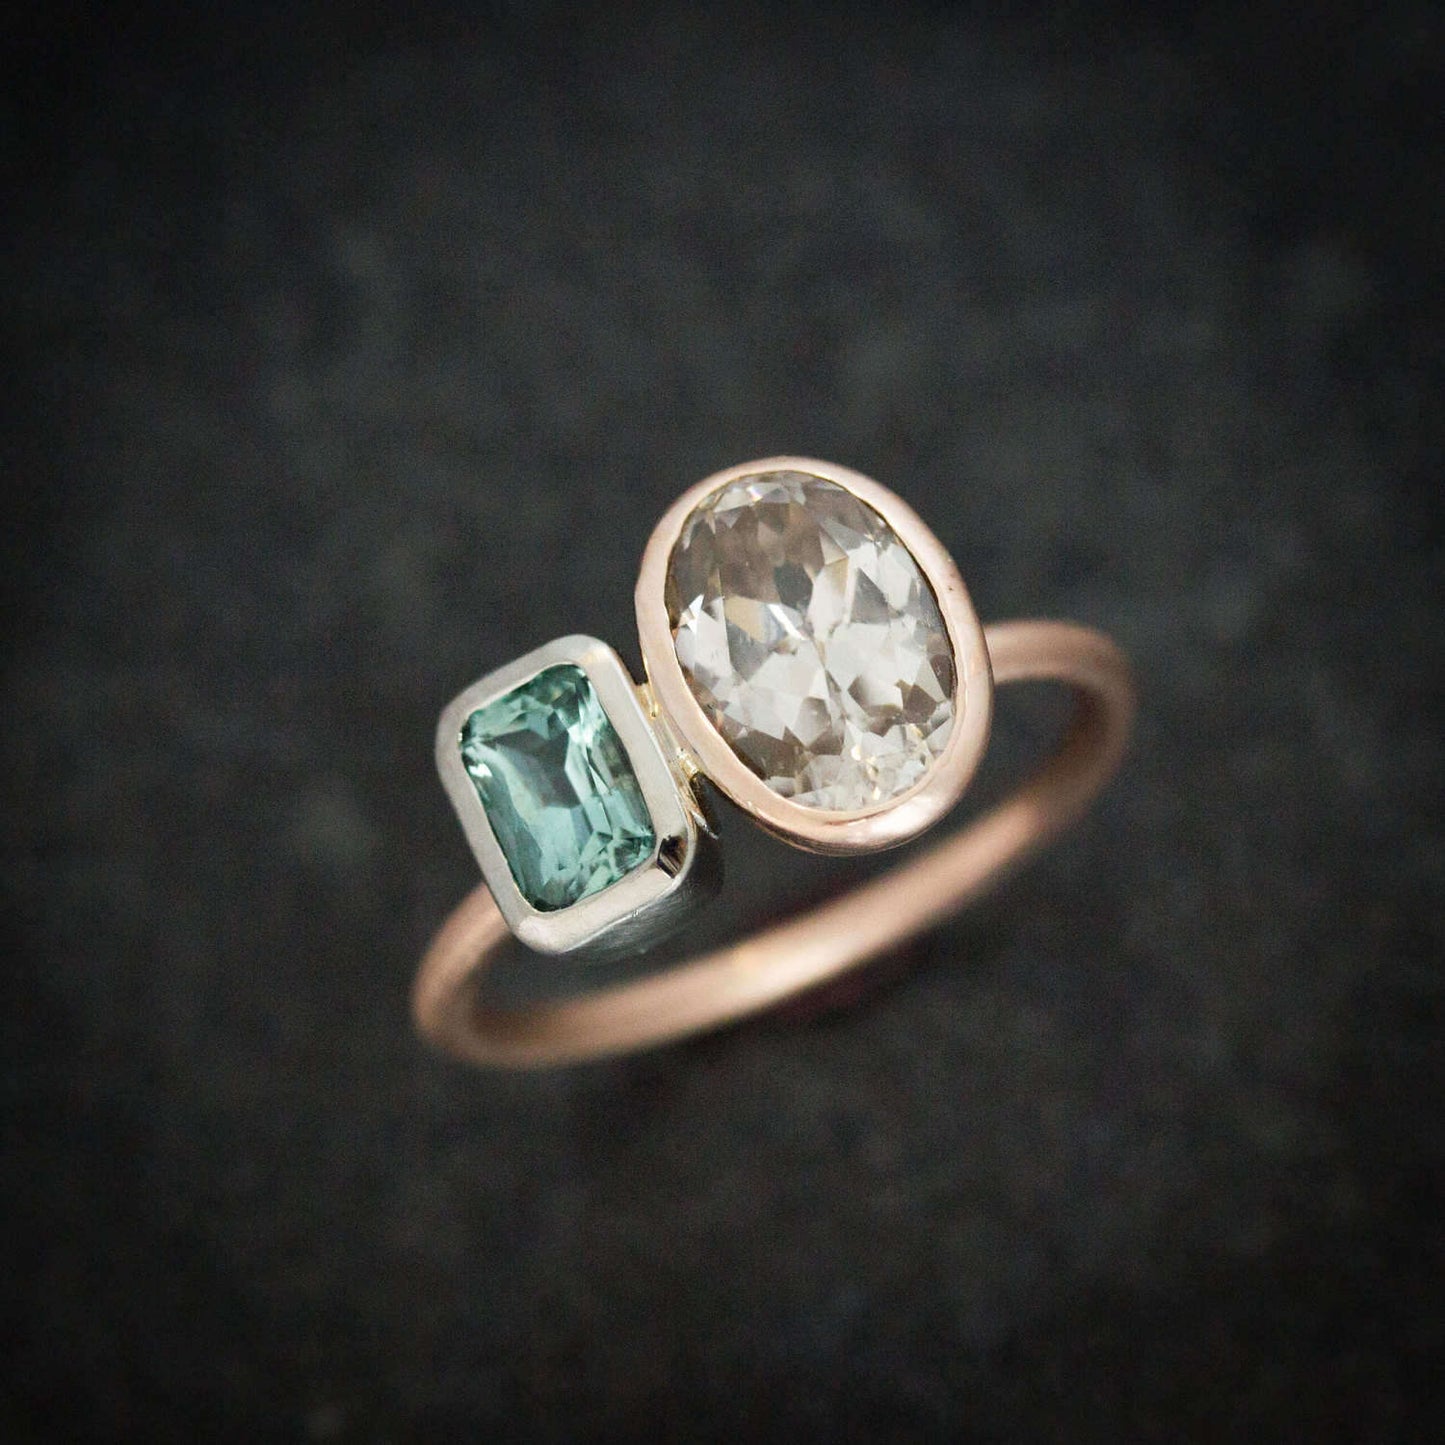 Asymmetrical Blue Tourmaline Ring with Natural Champagne Zircon Mixed Metal Rose and White Gold Ring - Madelynn Cassin Designs